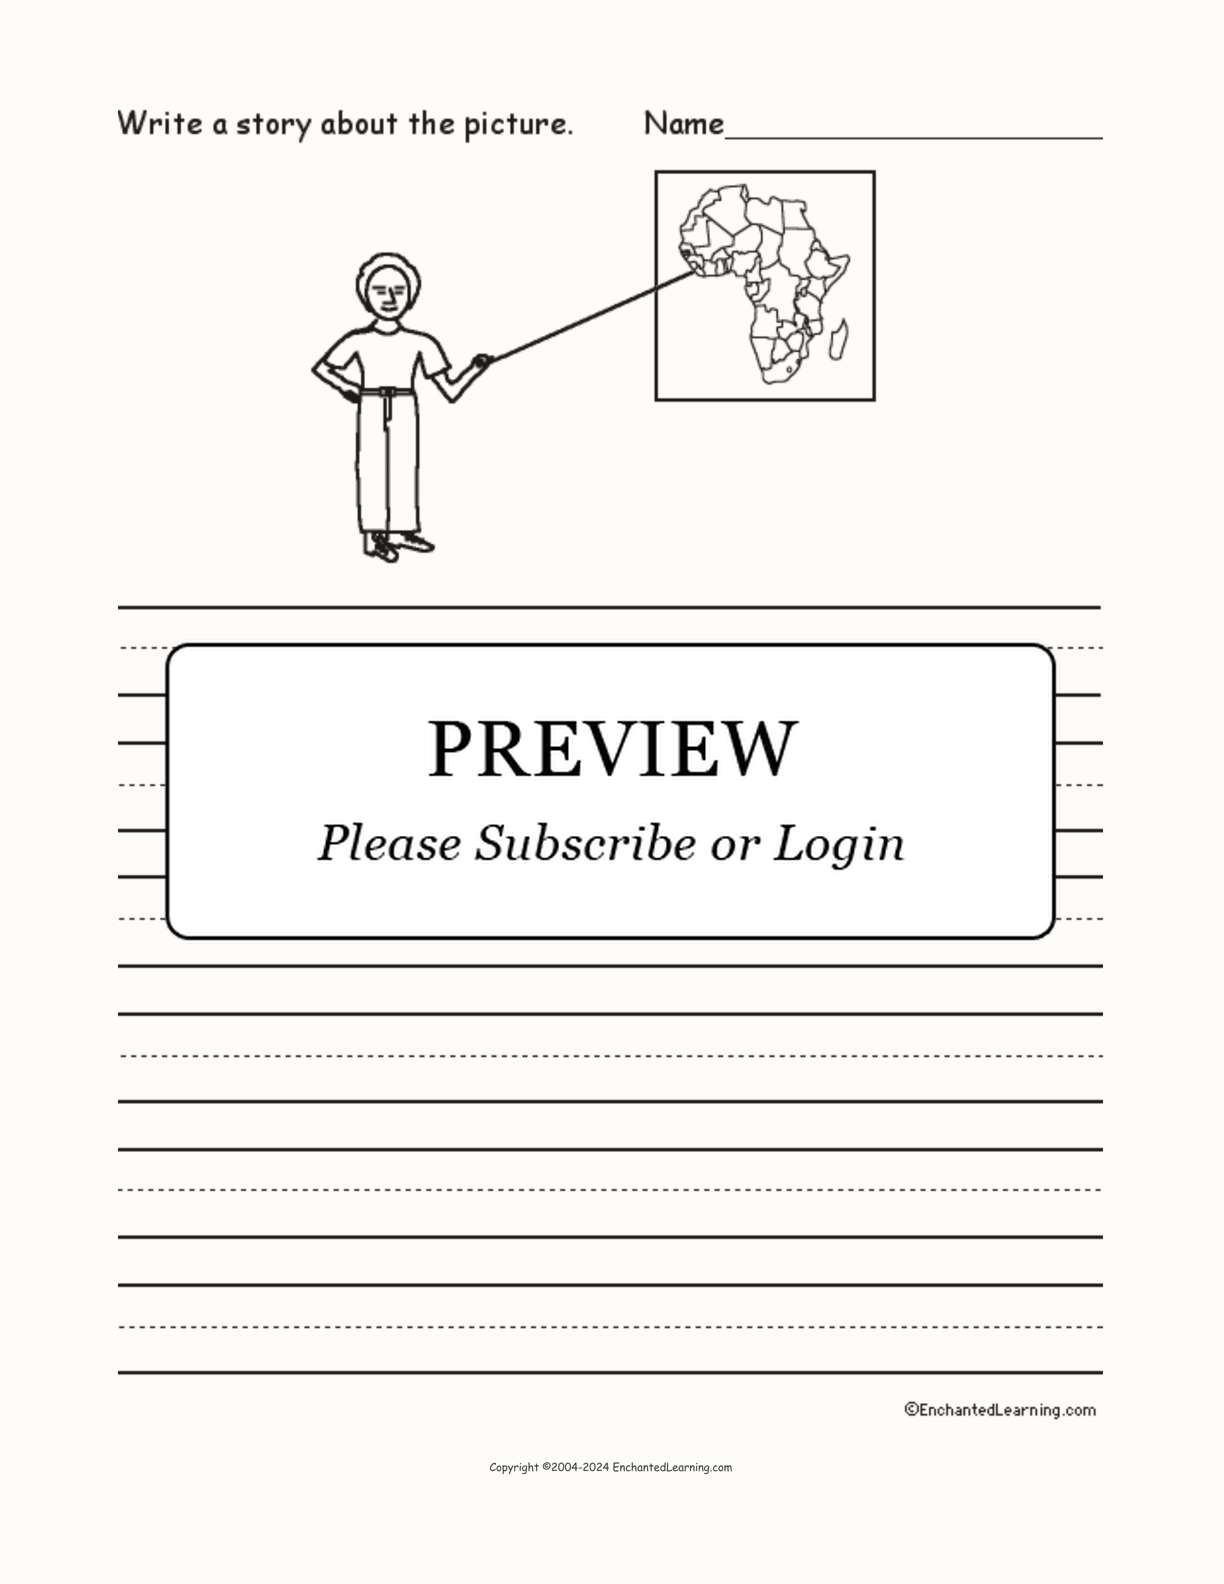 Picture Prompts - Africa interactive worksheet page 1